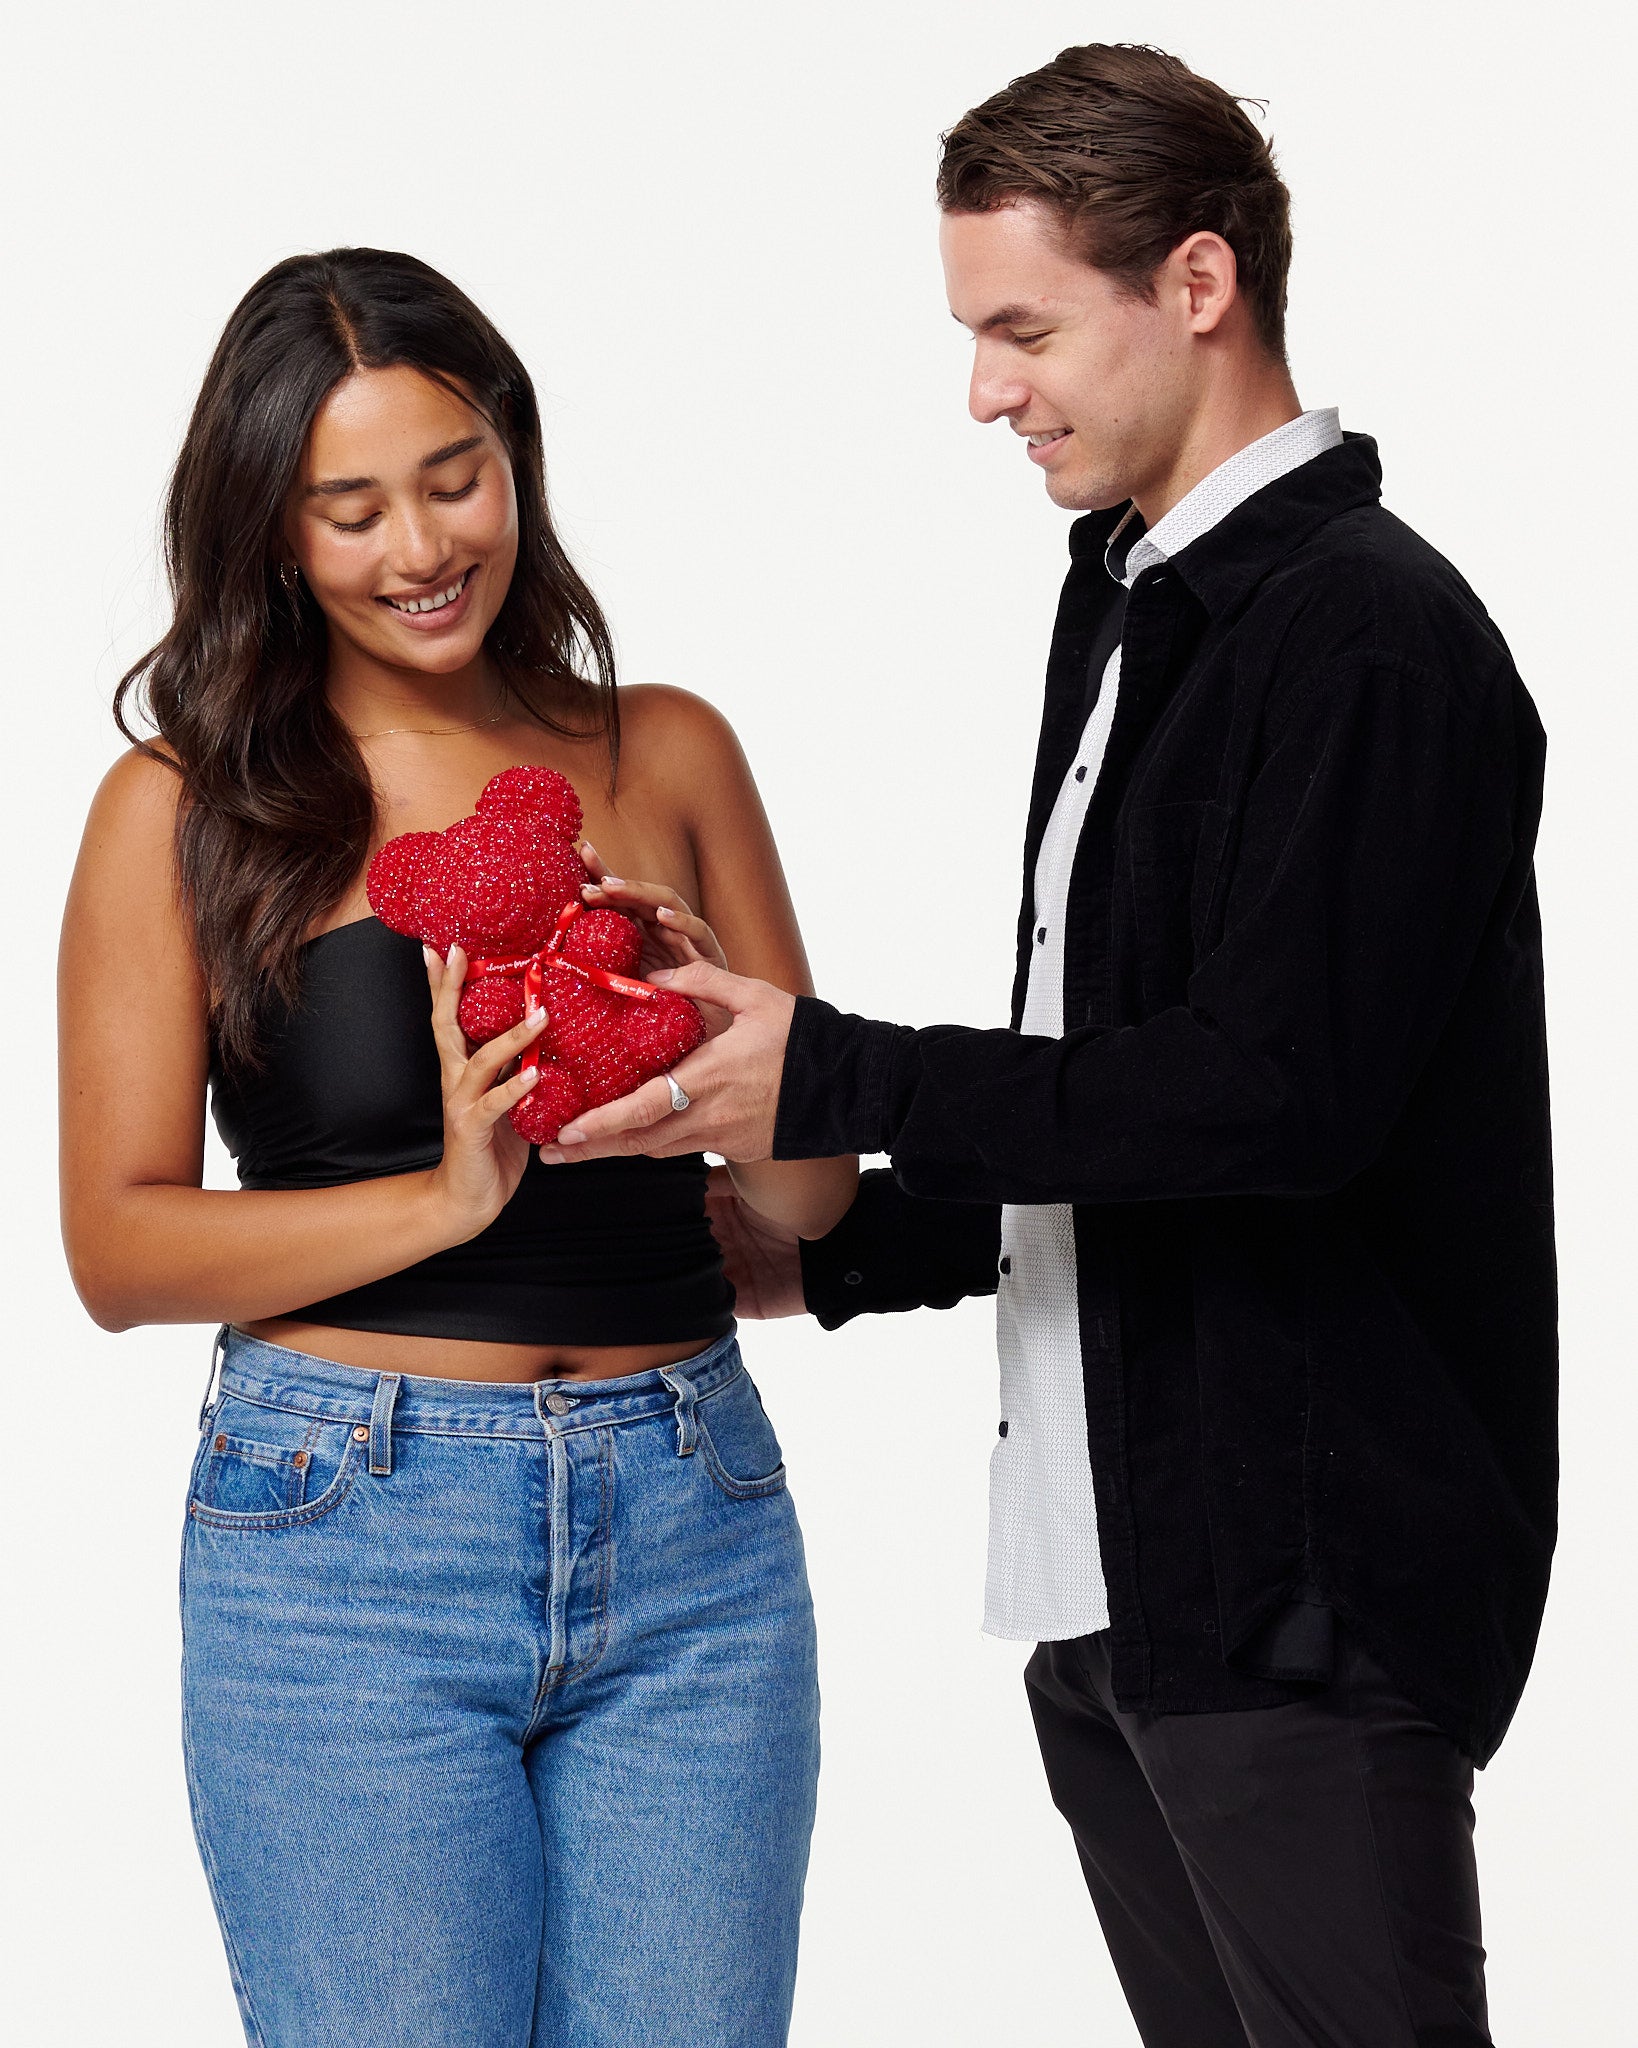  The image shows a woman and a man standing side by side. The woman is to the left, wearing a black cropped top and blue jeans, smiling down at a red, sparkly teddy bear she is holding. The man is to the right, dressed in a black jacket over a white shirt, also looking at the teddy bear with a smile, his hands gently touching the bear. Both individuals appear cheerful and are engaging with the teddy bear in a gentle manner. 